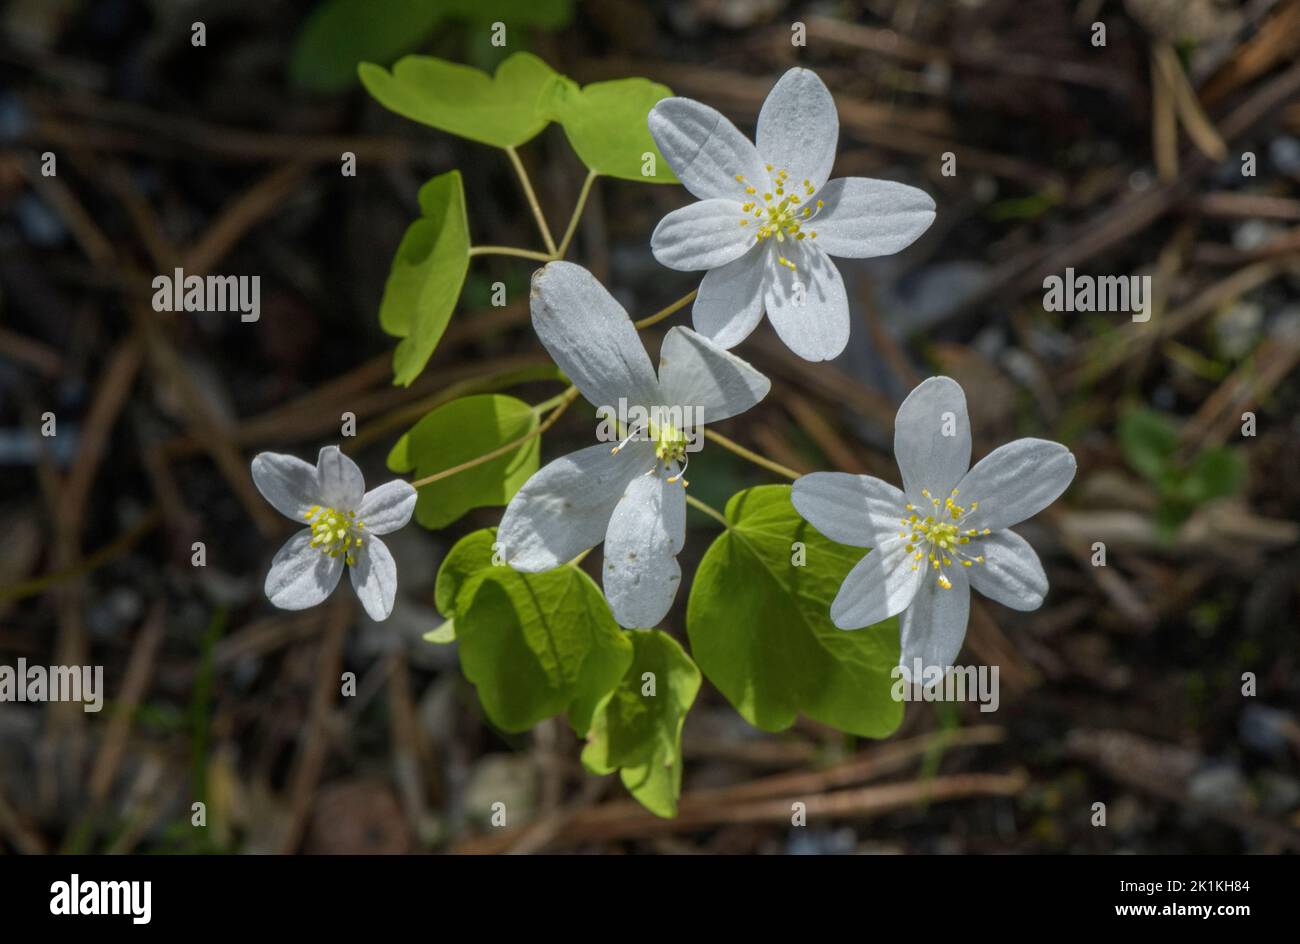 Rue-anemone, Anemonella thalictroides in flower in woodland, eastern USA. Stock Photo